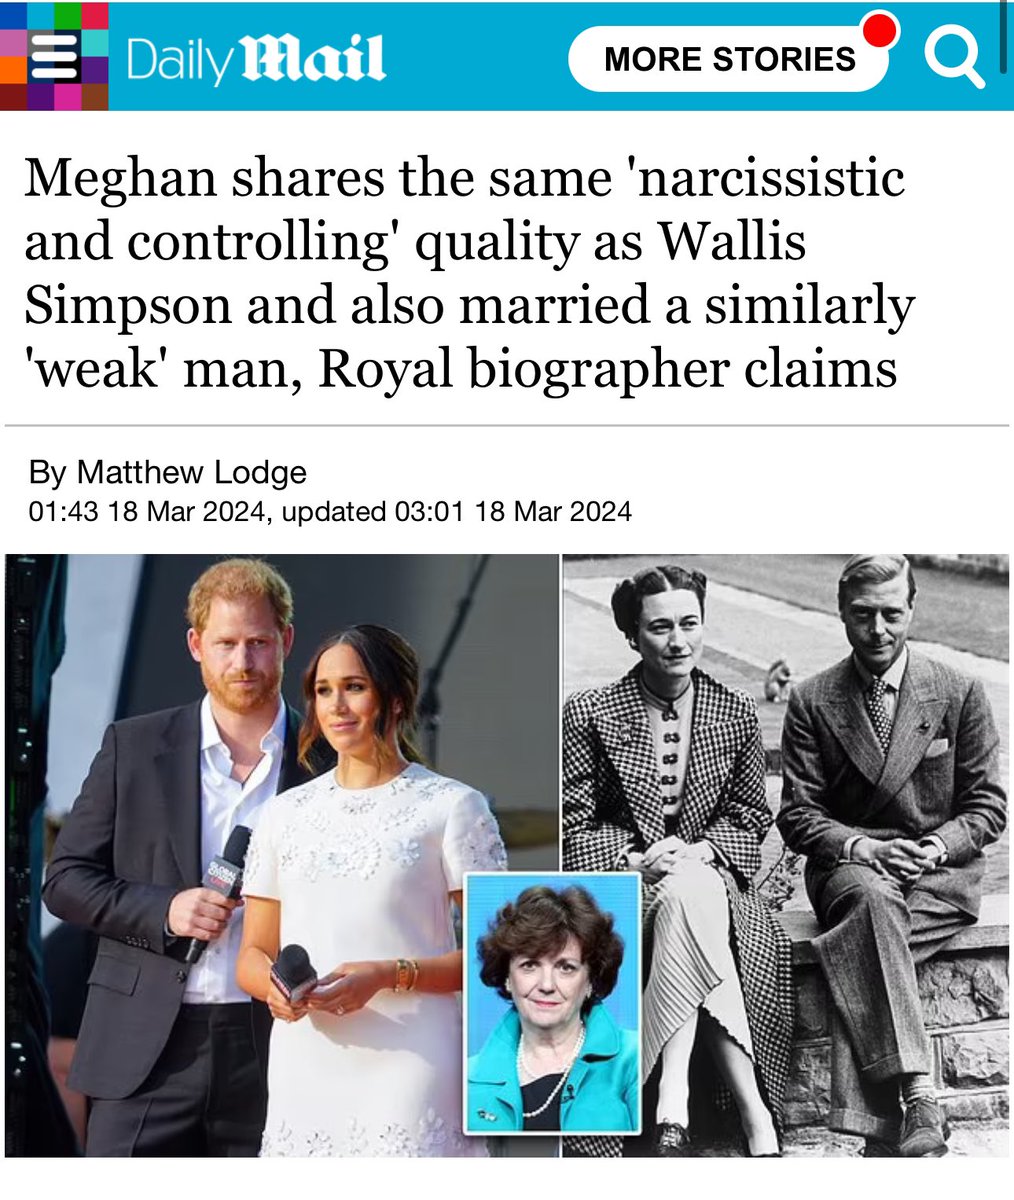 Wow the British Racist Media strikes again bullying and treating Meghan Markle differently and this time she’s  being called “Narcissistic” and “Controlling” all because she fell in love with Harry, moved away from all the negative bullshit to start a better life for her family.